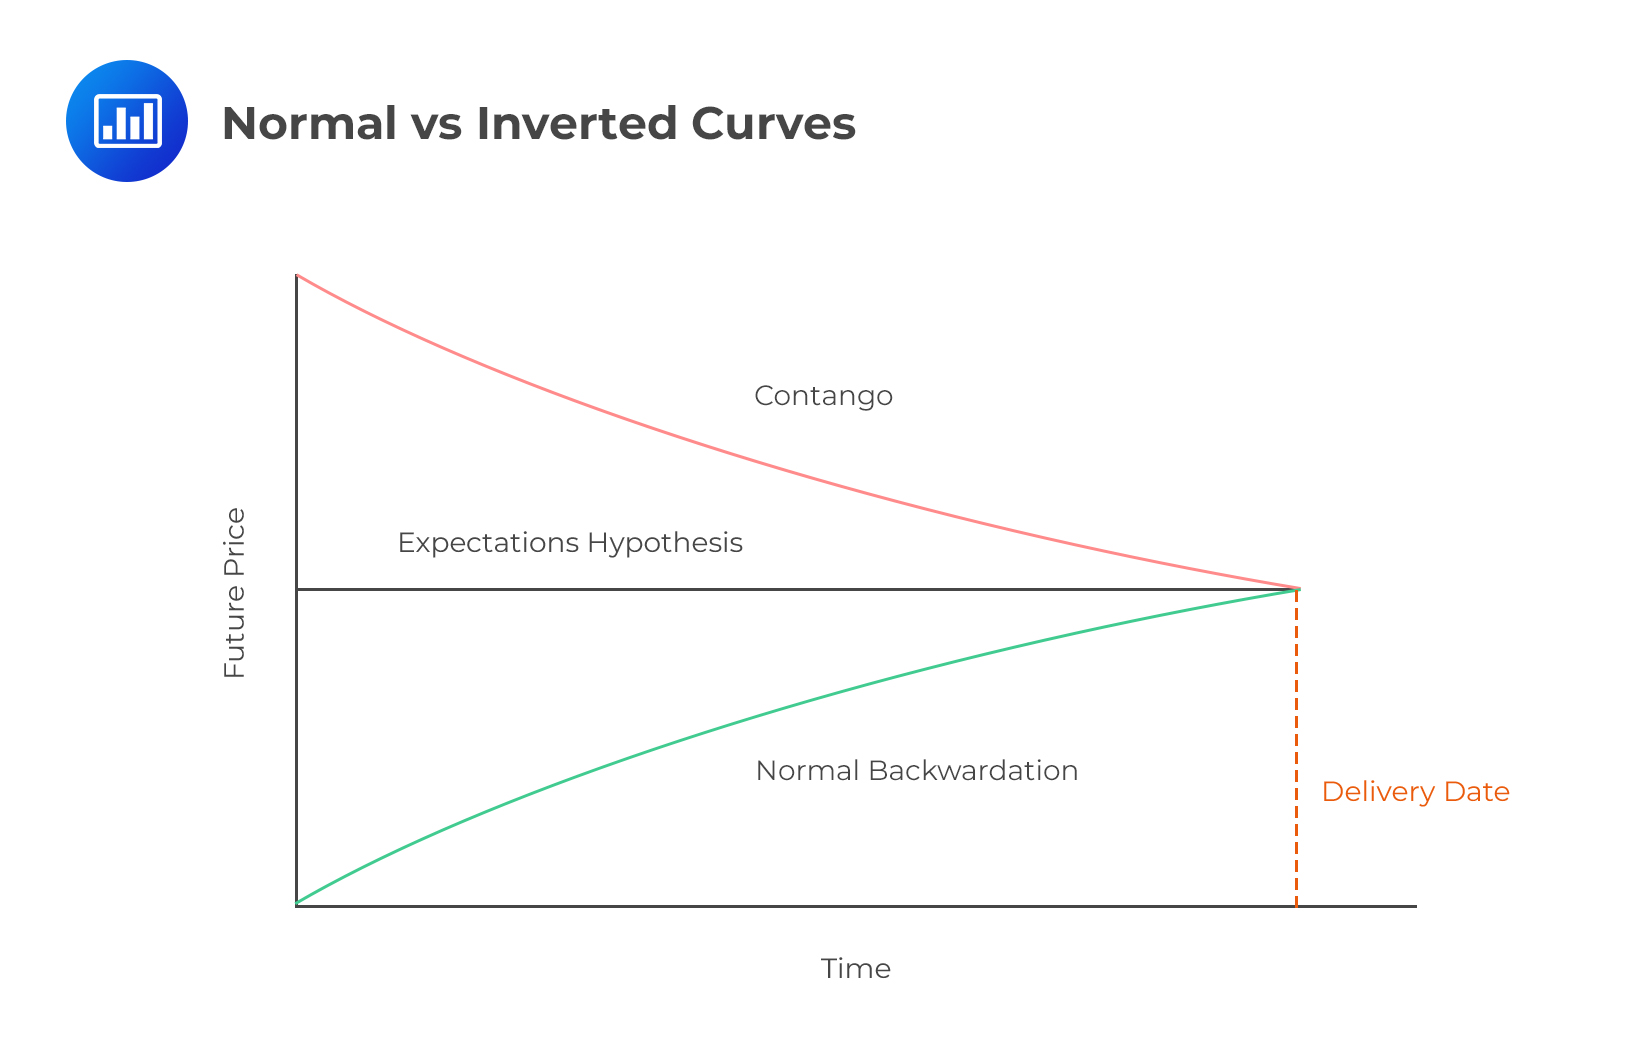 Normal vs Inverted Curves